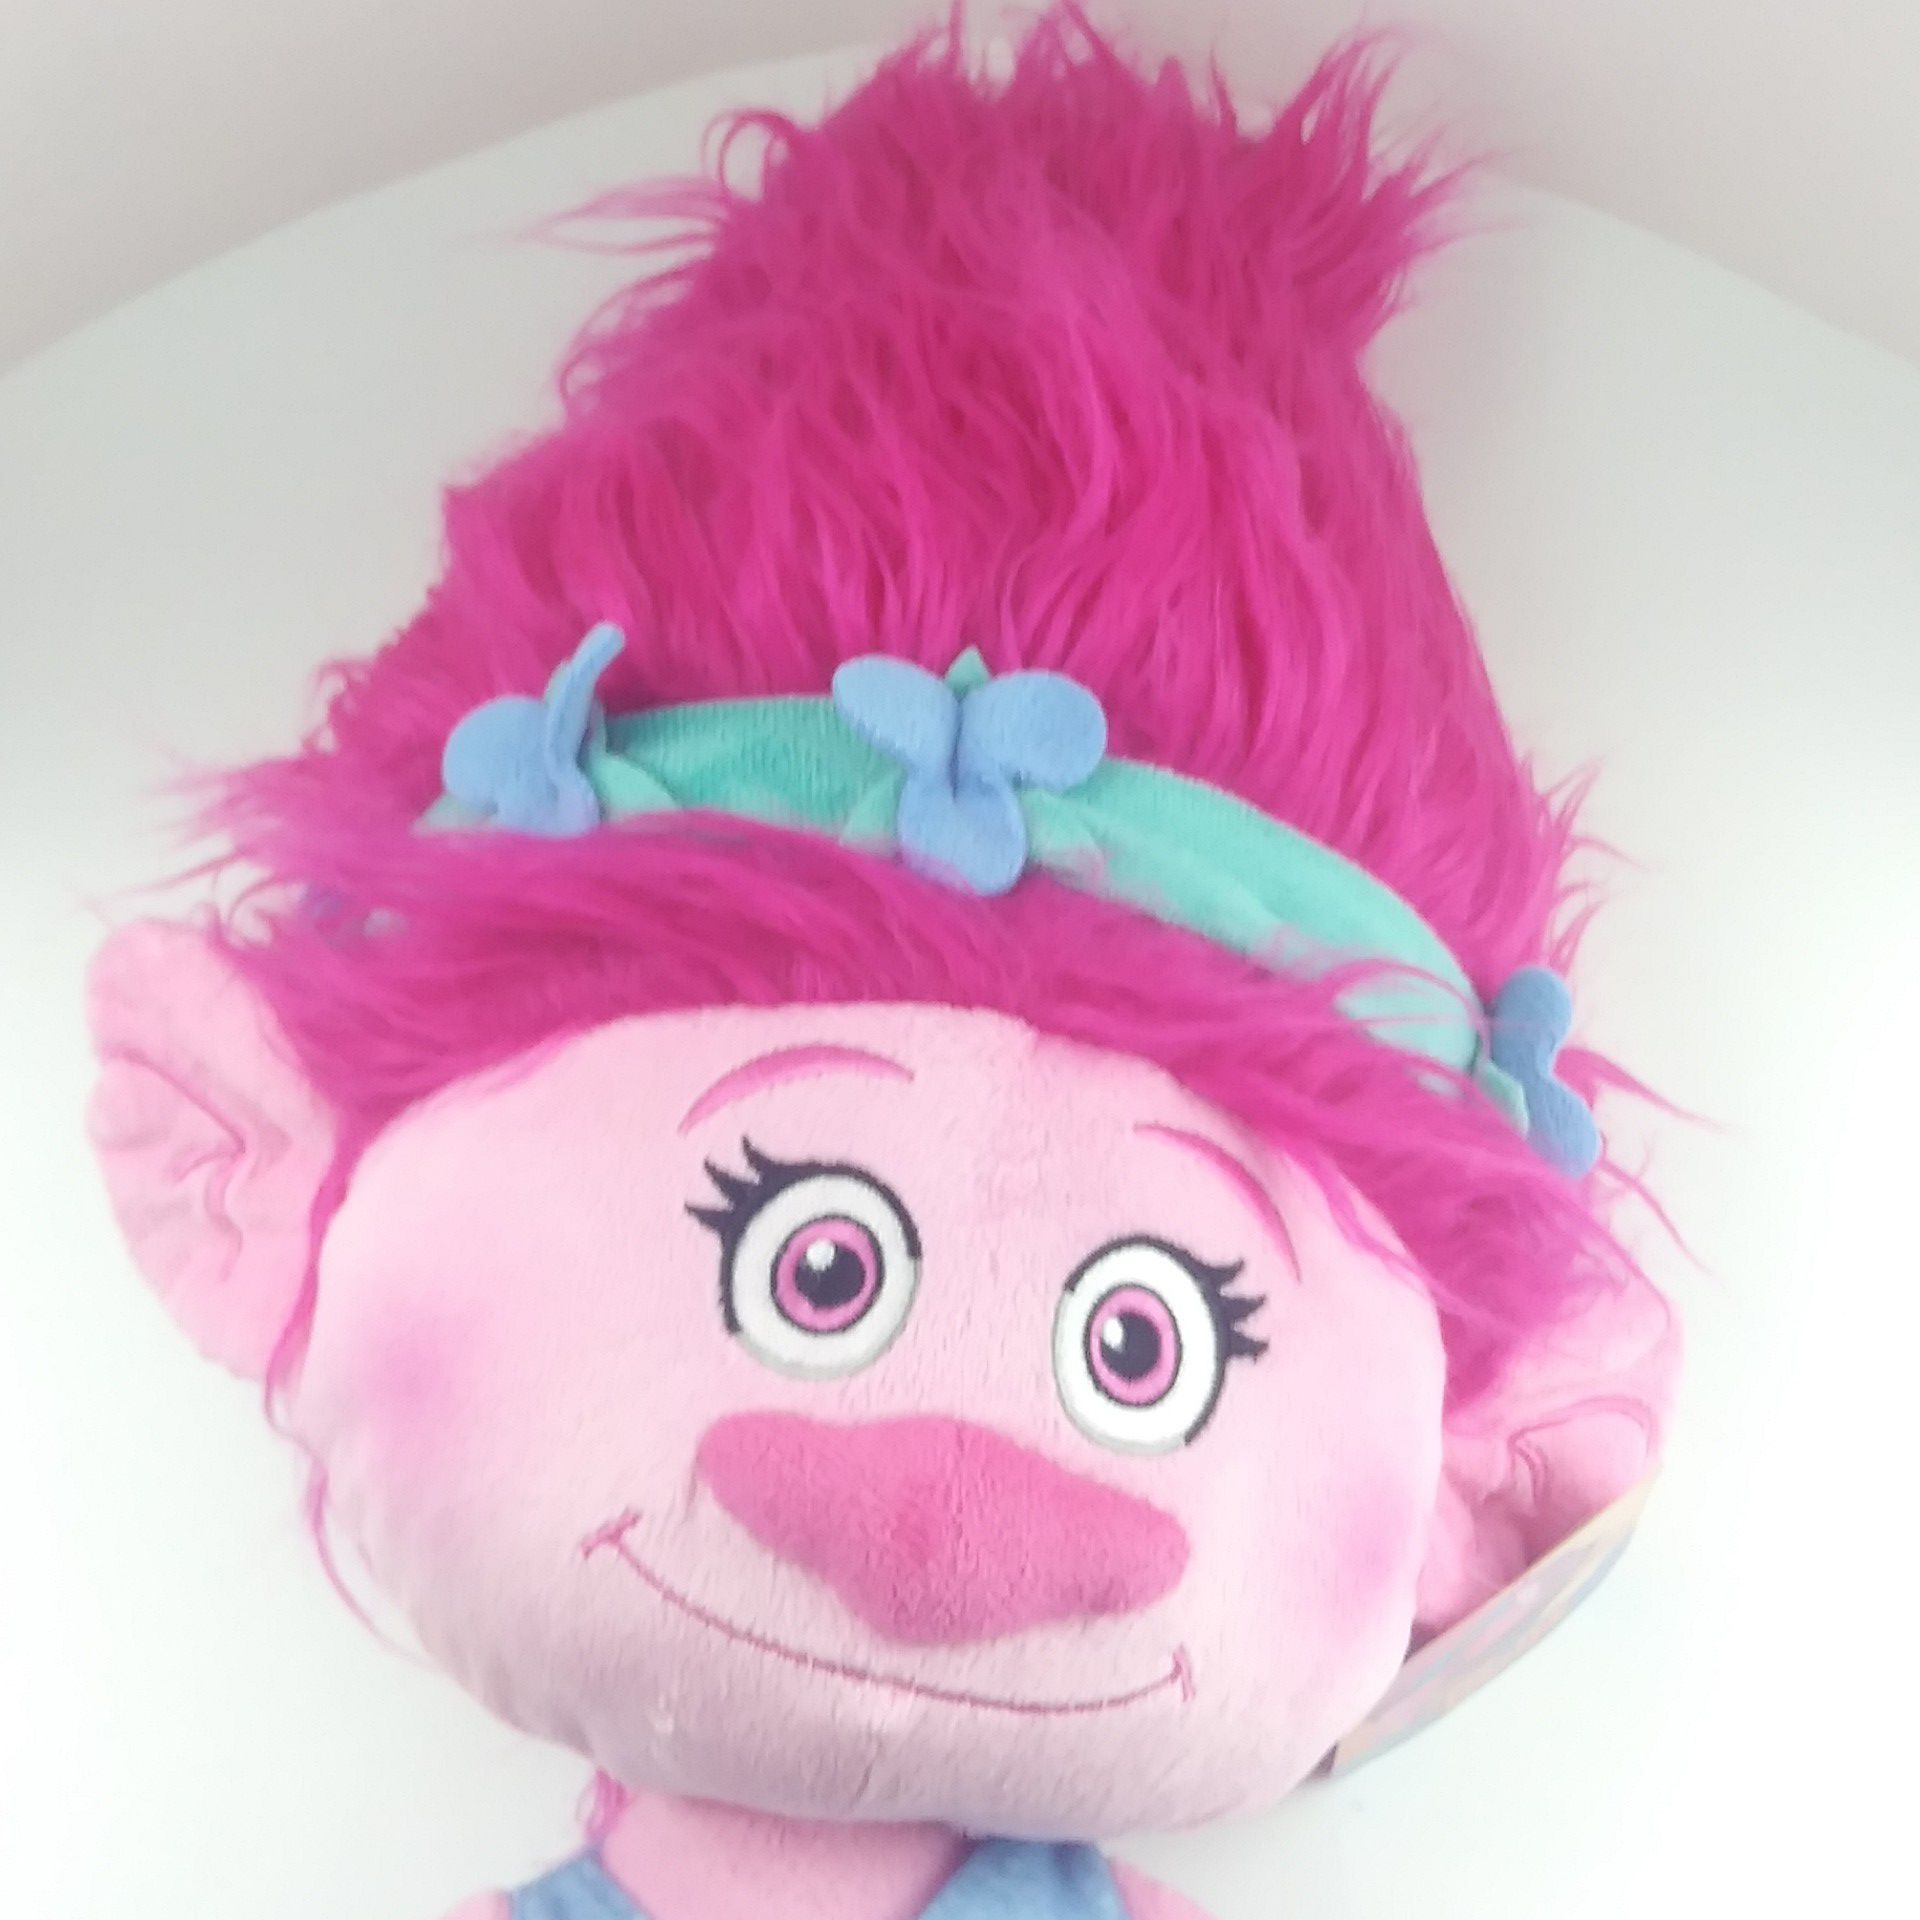 Dreamworks Trolls Poppy 22" Pillow Buddy Pillow Pal Pink New with tags